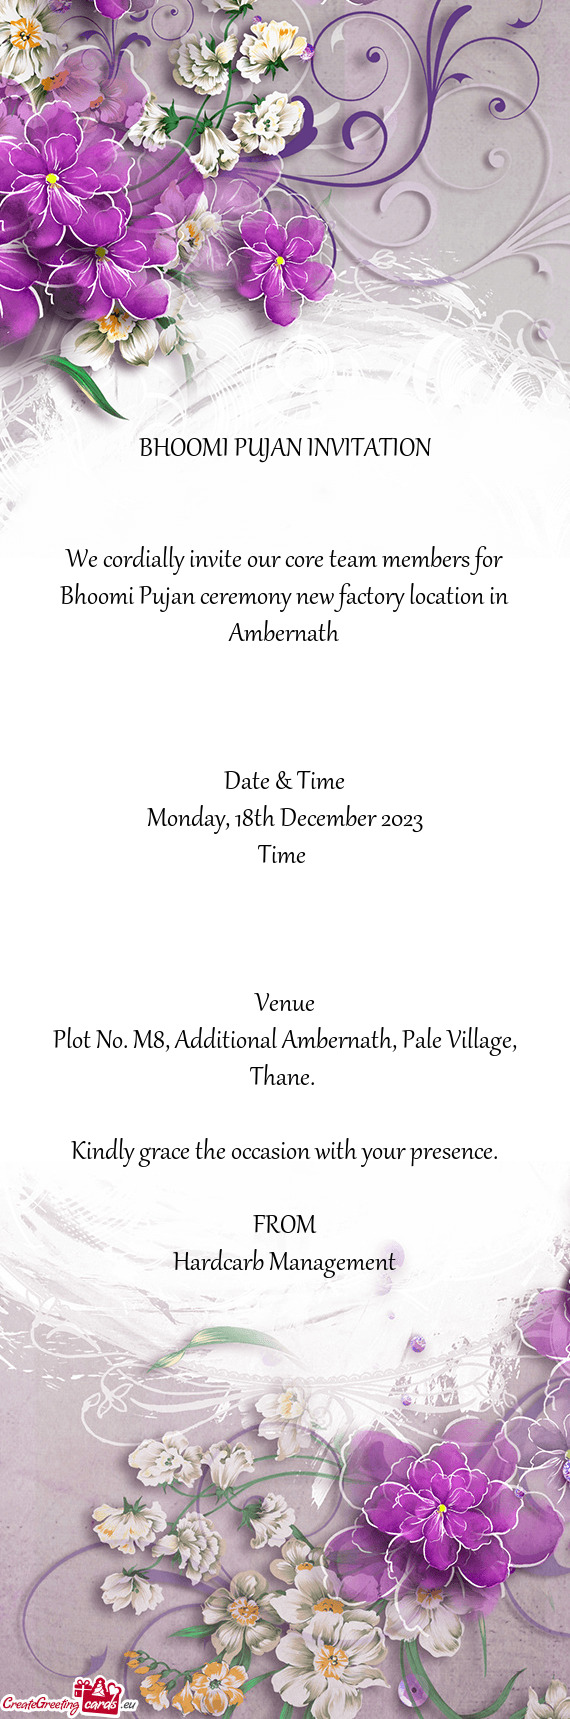 We cordially invite our core team members for Bhoomi Pujan ceremony new factory location in Ambernat